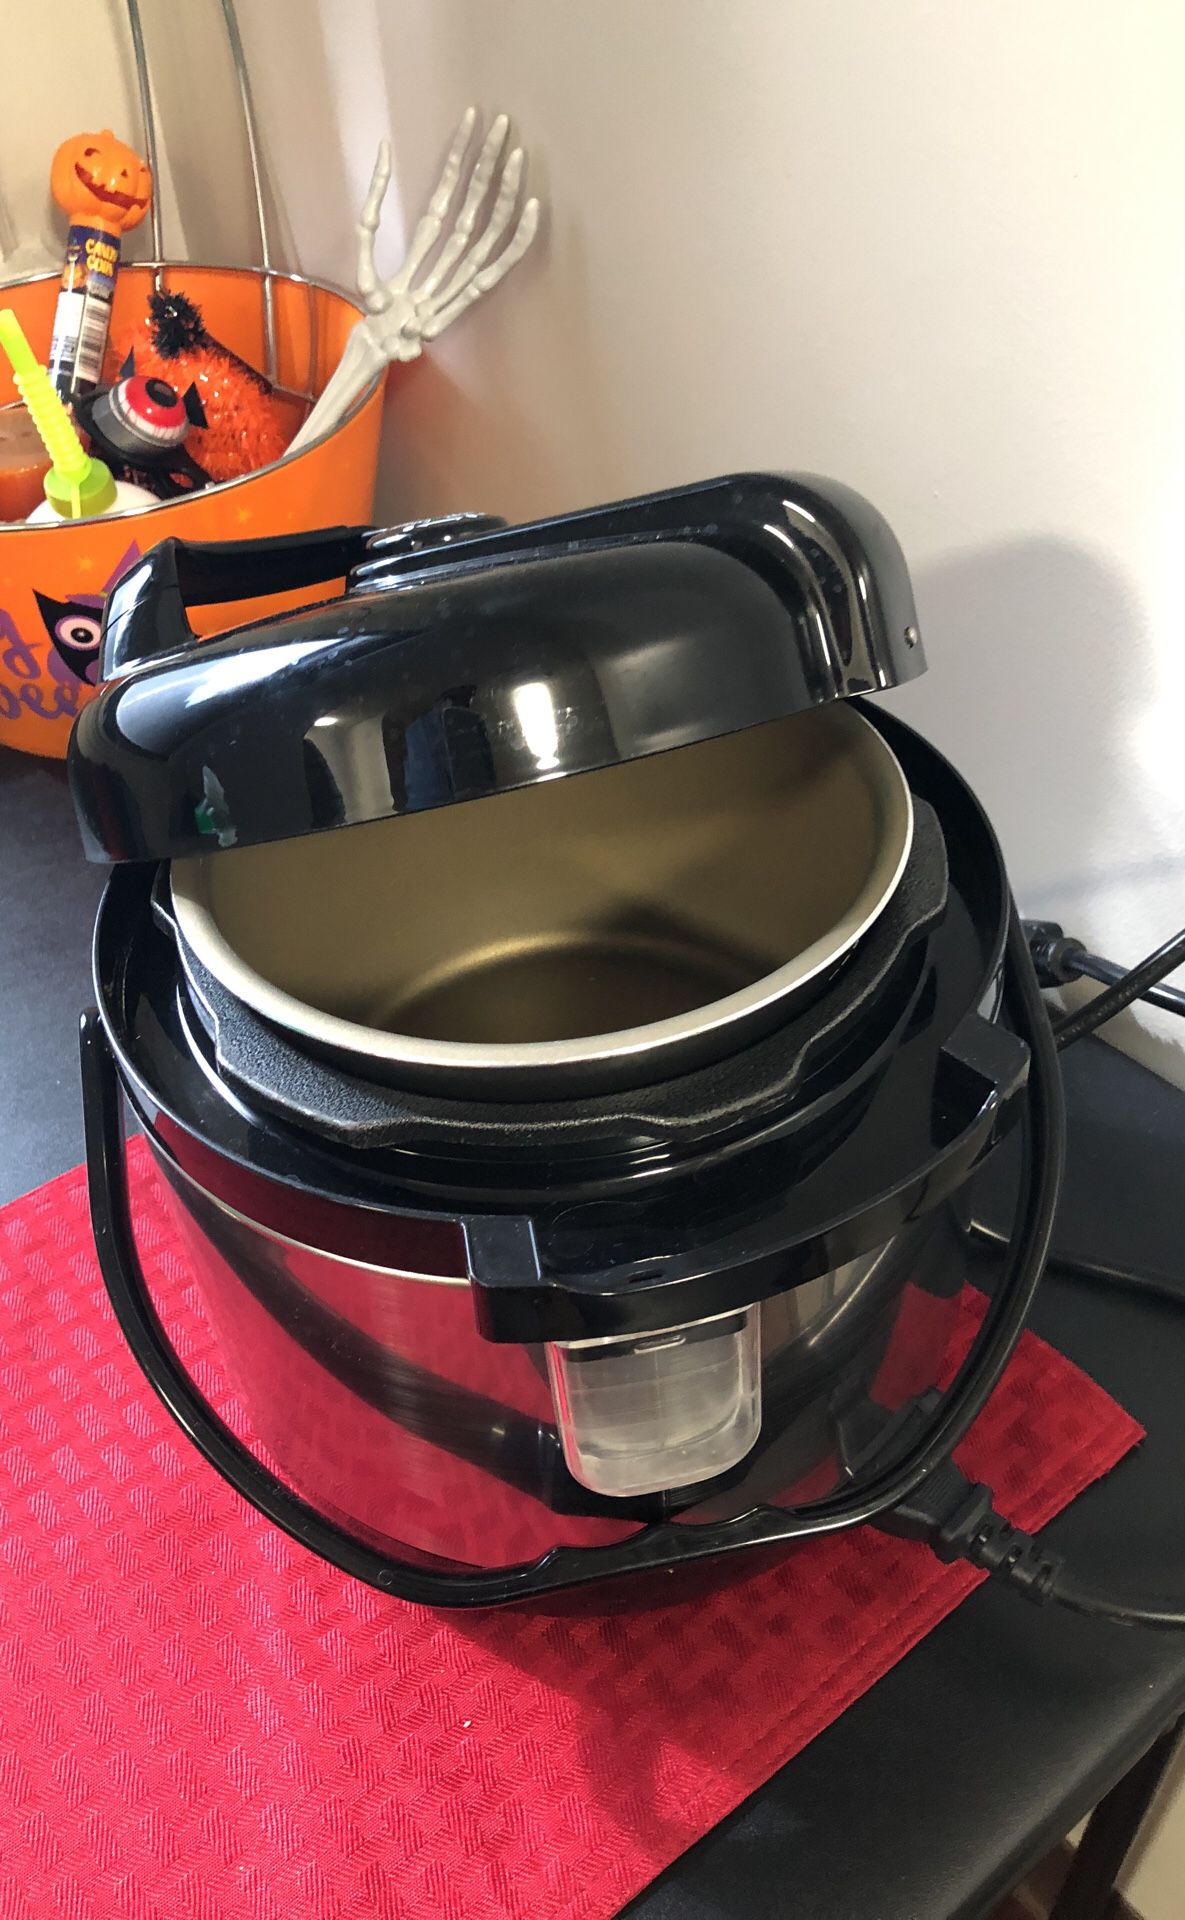 Rice and pressure cooker